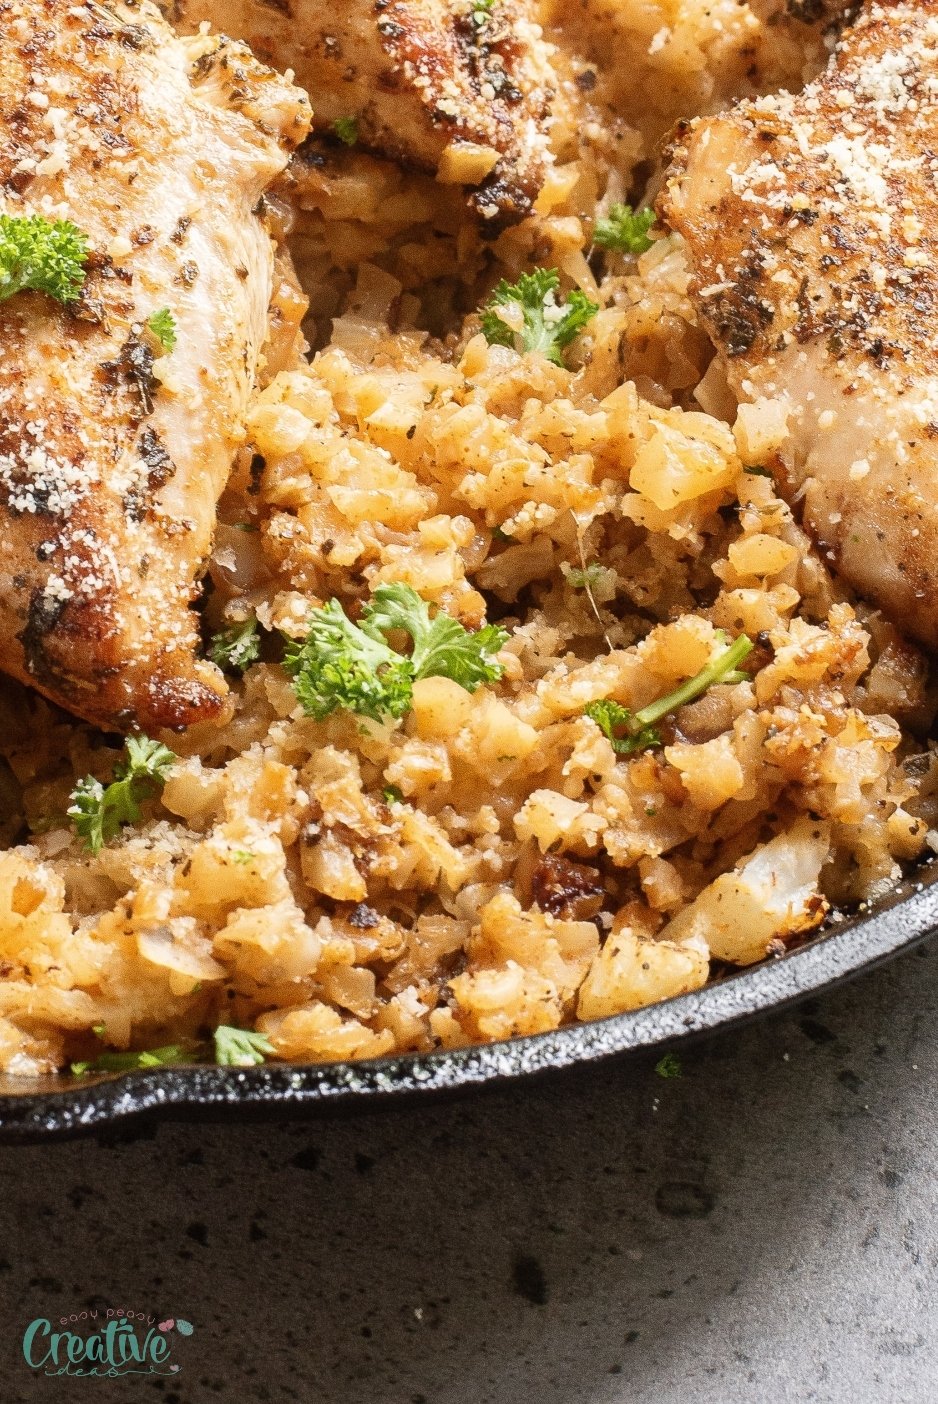 Discover a quick and flavorful parmesan cauliflower rice recipe, transforming simple cauliflower into a delicious low-carb side dish.